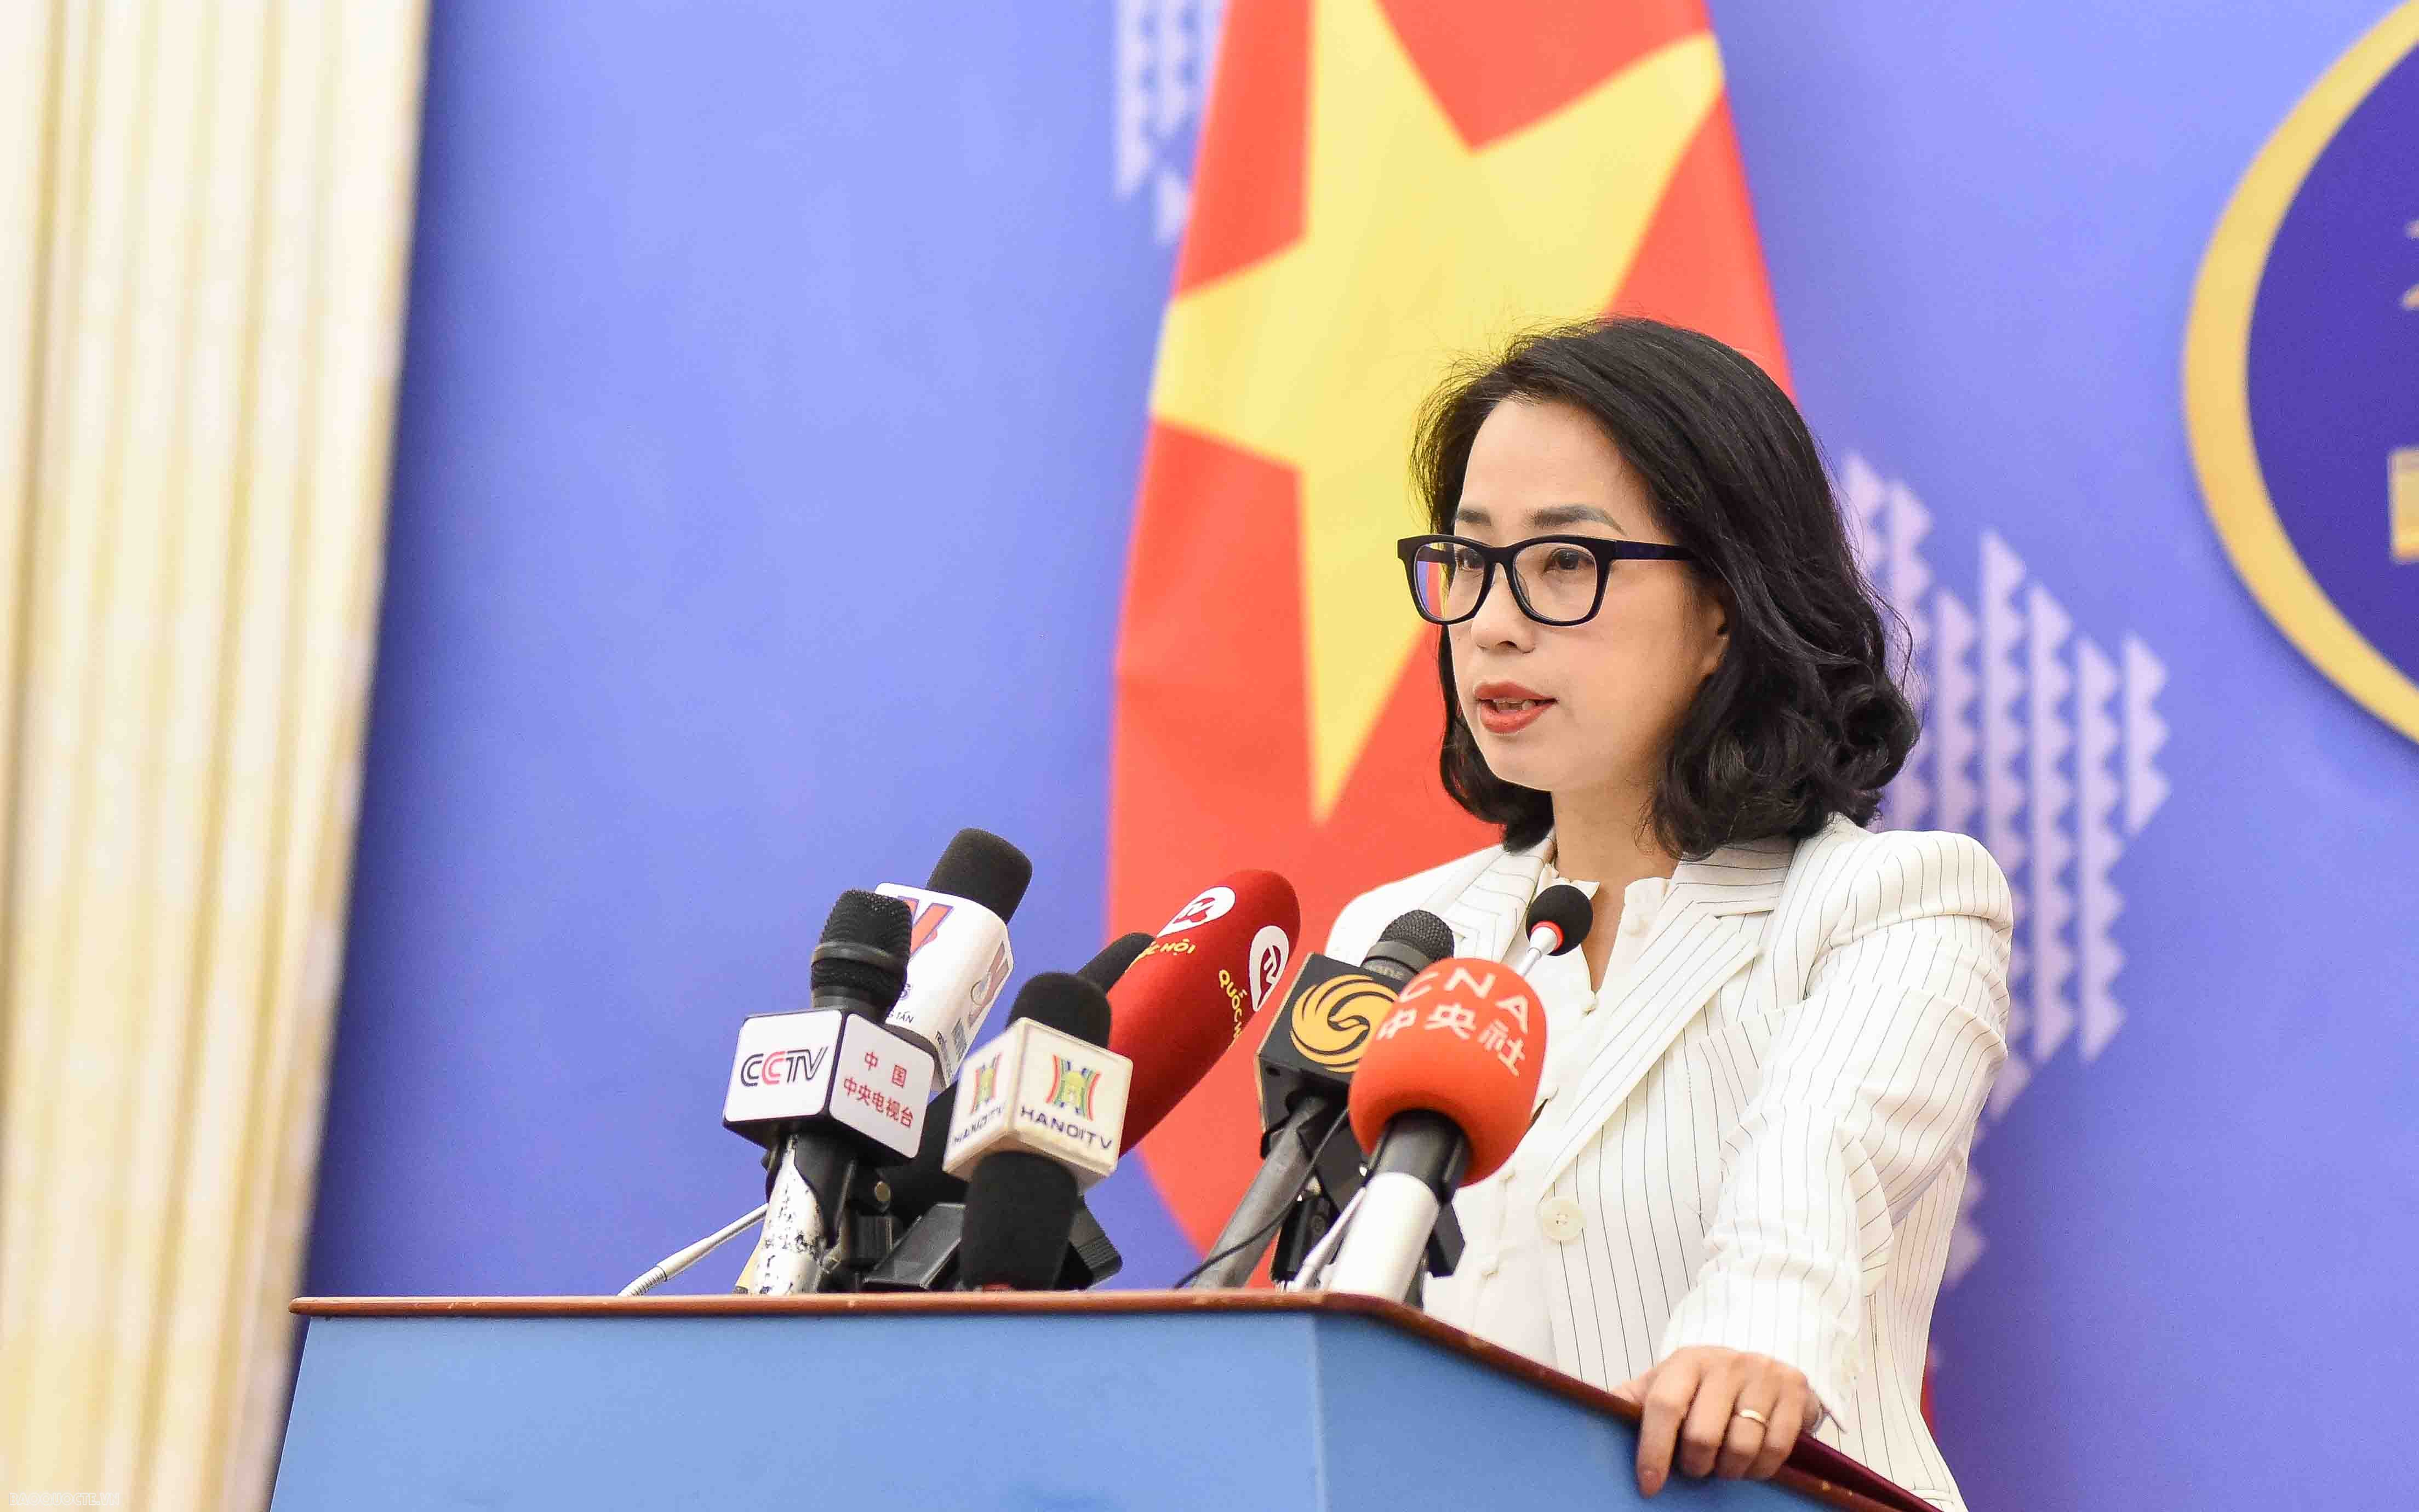 Vietnam demands China cease the illegal activities in Vietnamese waters: Foreign Ministry spokesperson